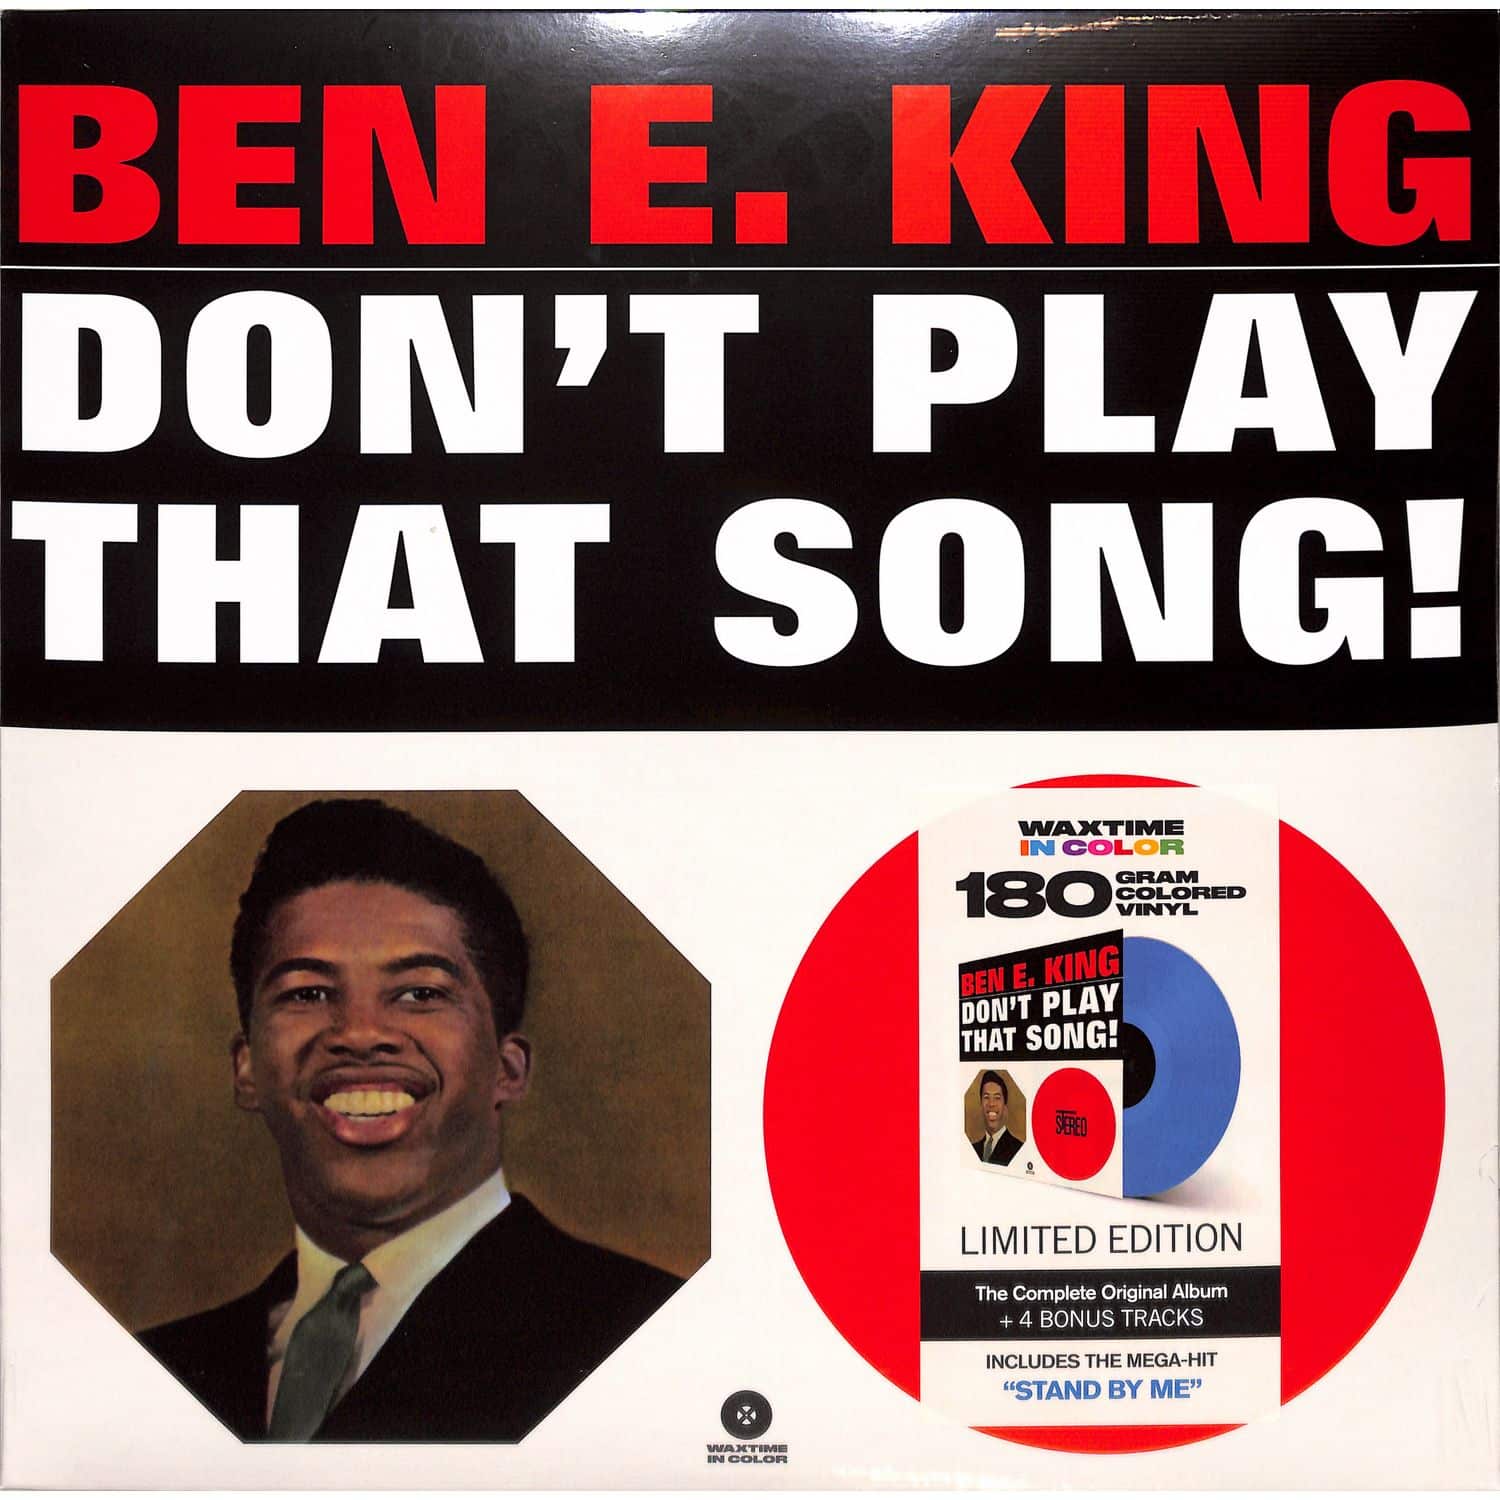 Ben E. King - DON T PLAY THAT SONG! 